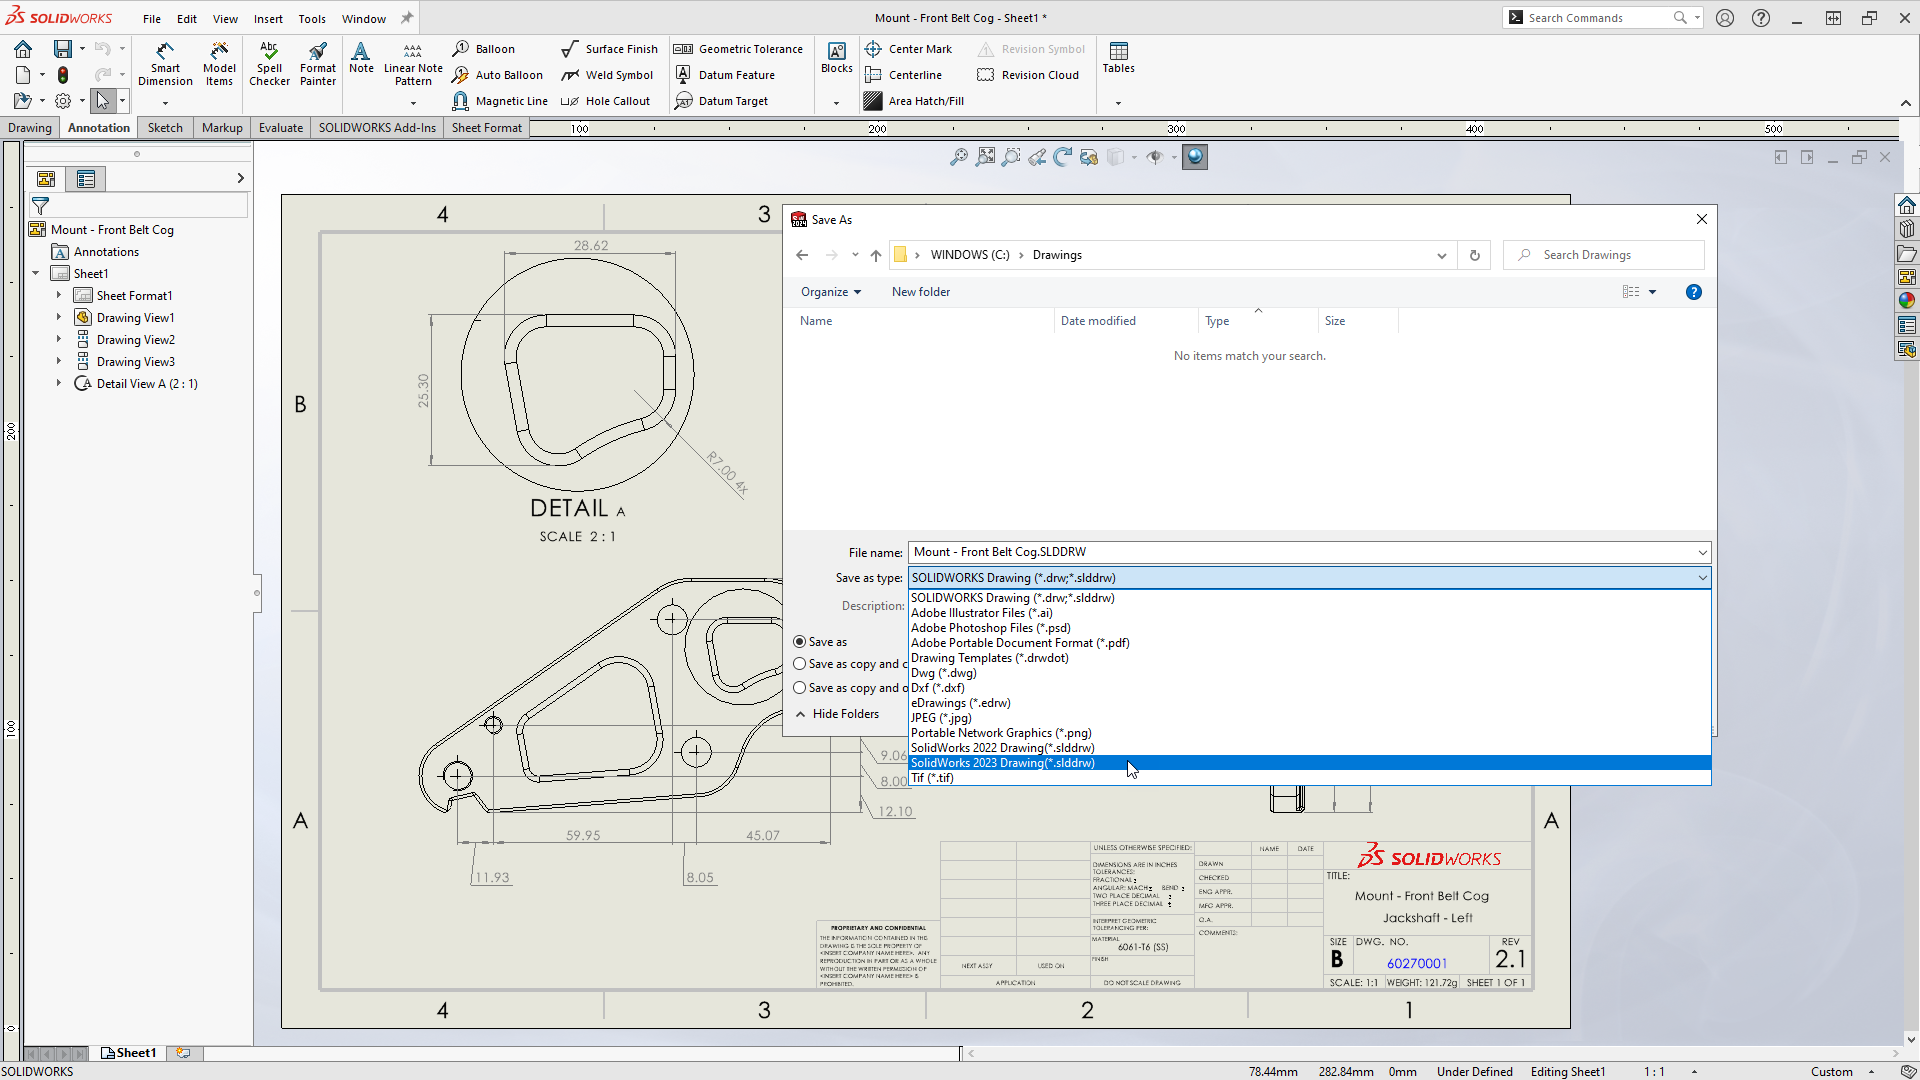 SOLIDWORKS Drawings - Save as Previous Release.png